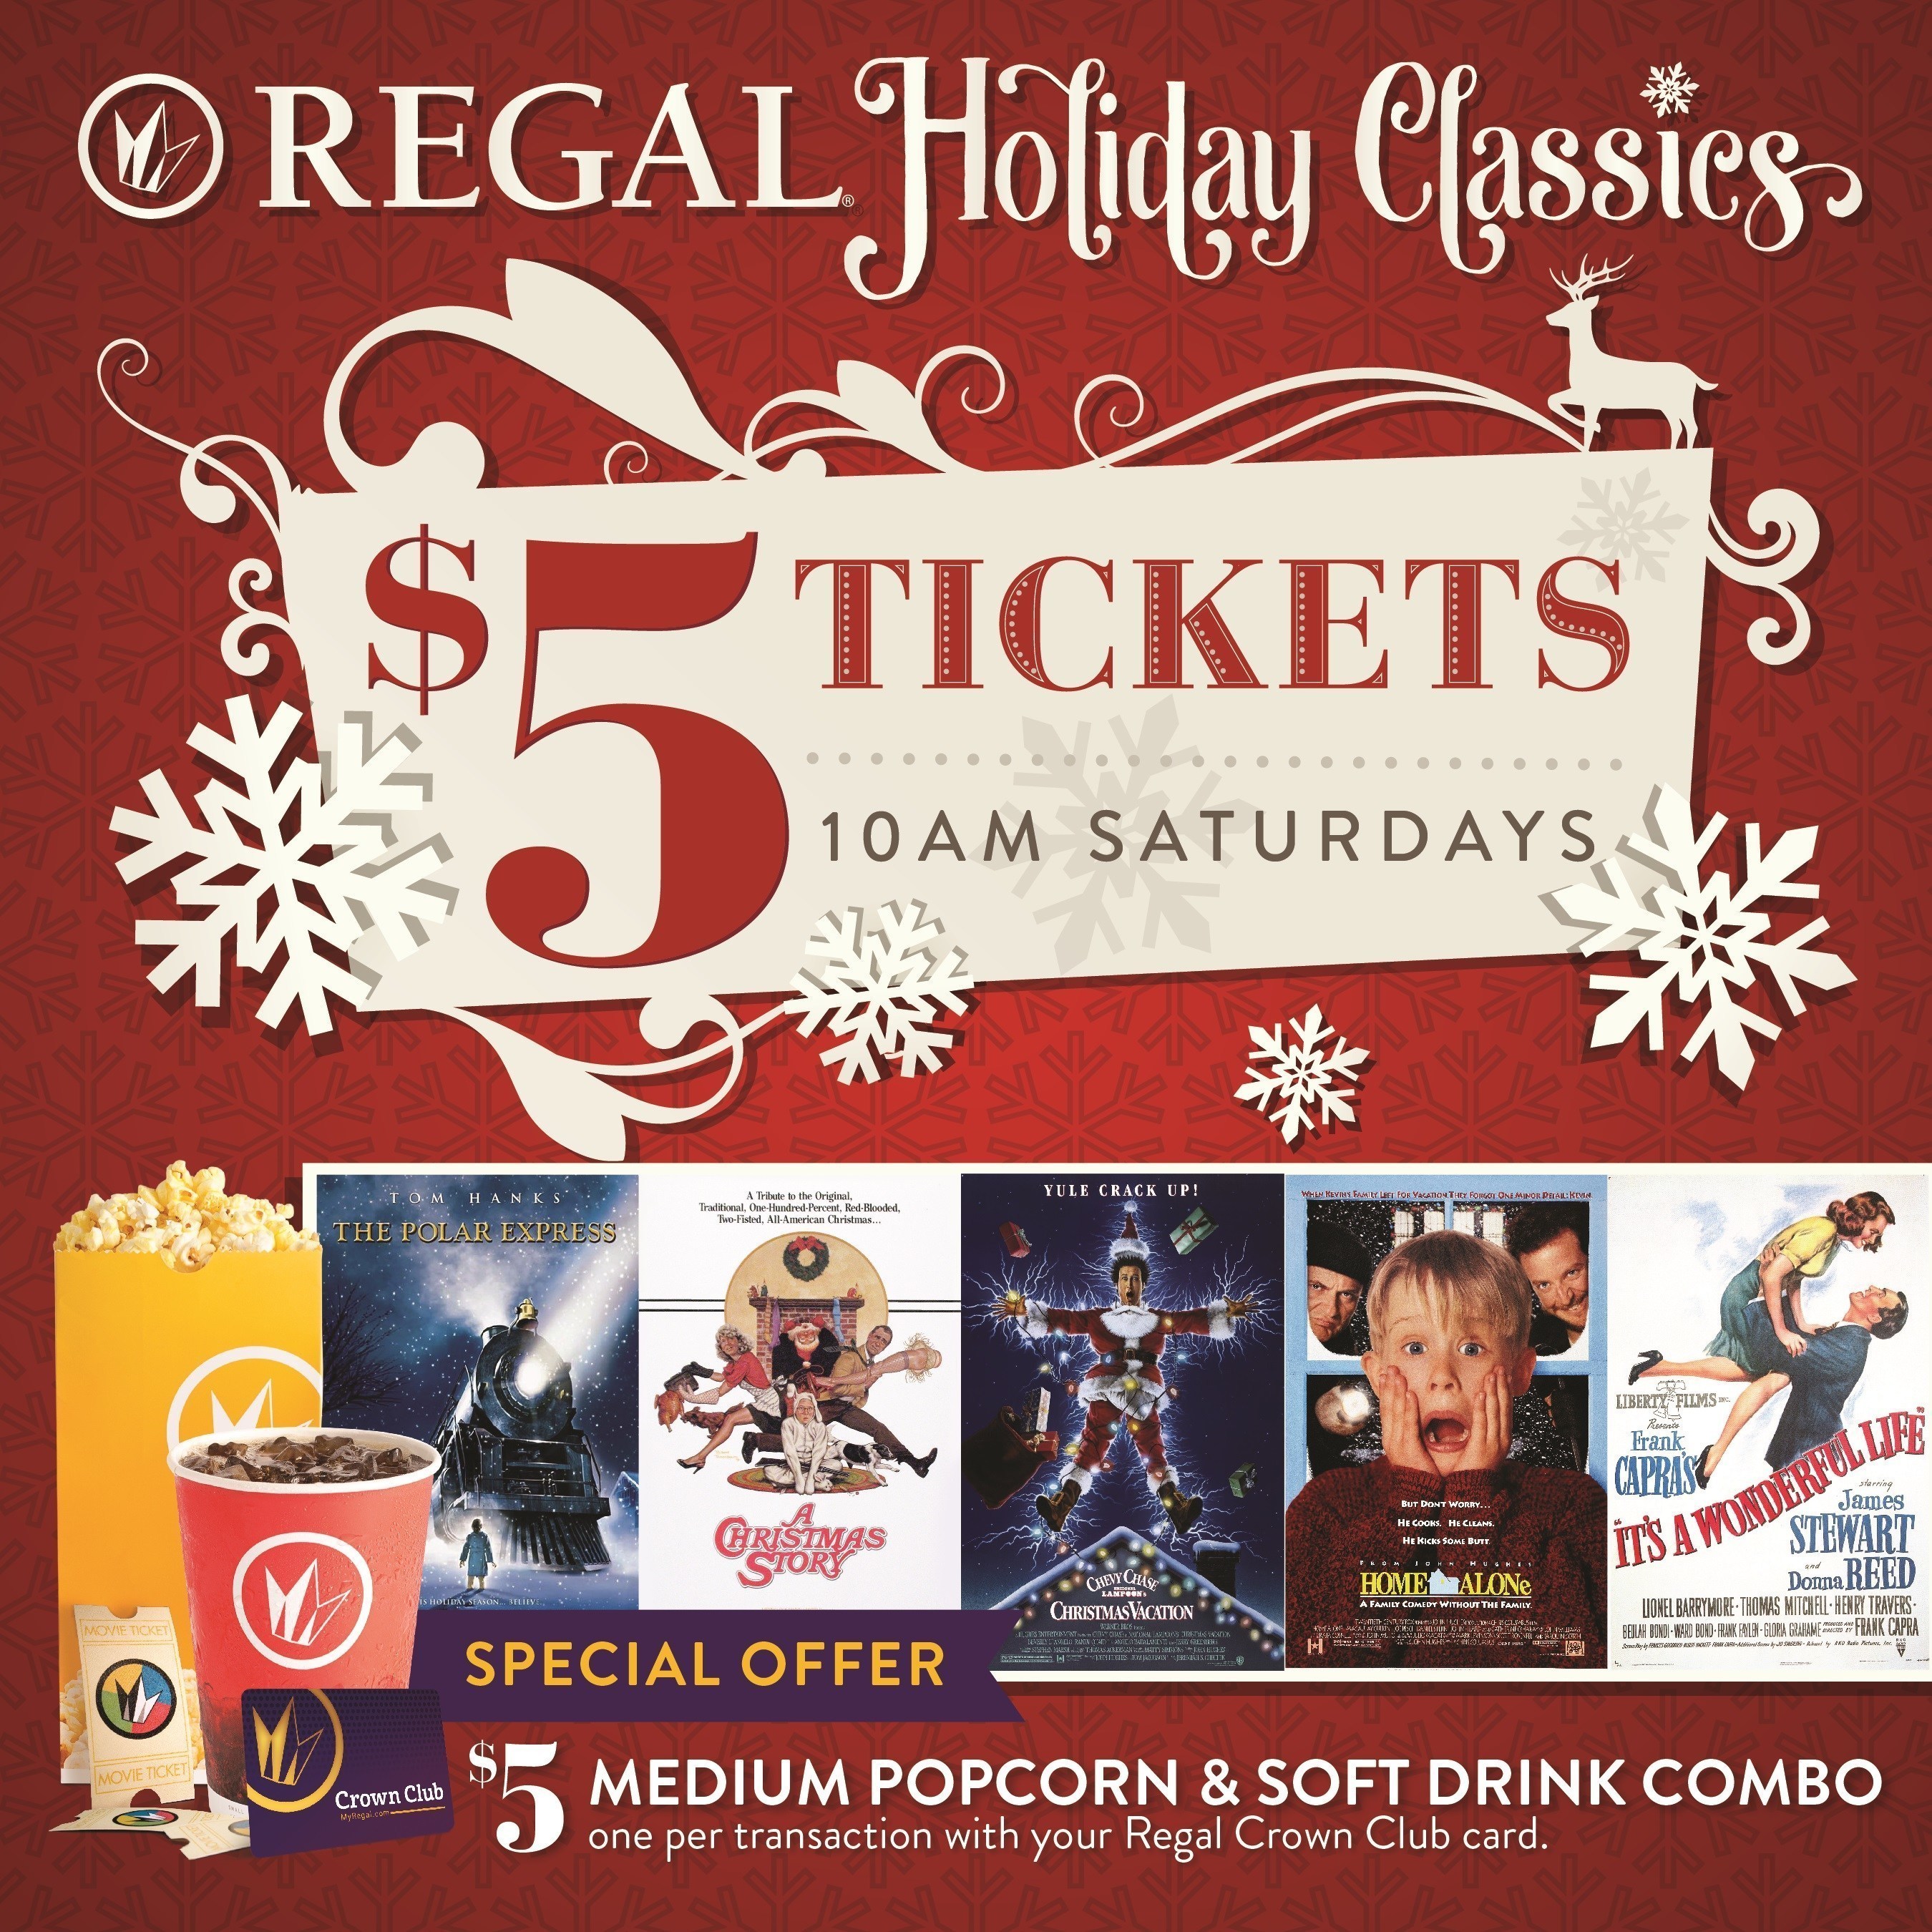 Get in the Spirit with the Holiday Classics at Regal